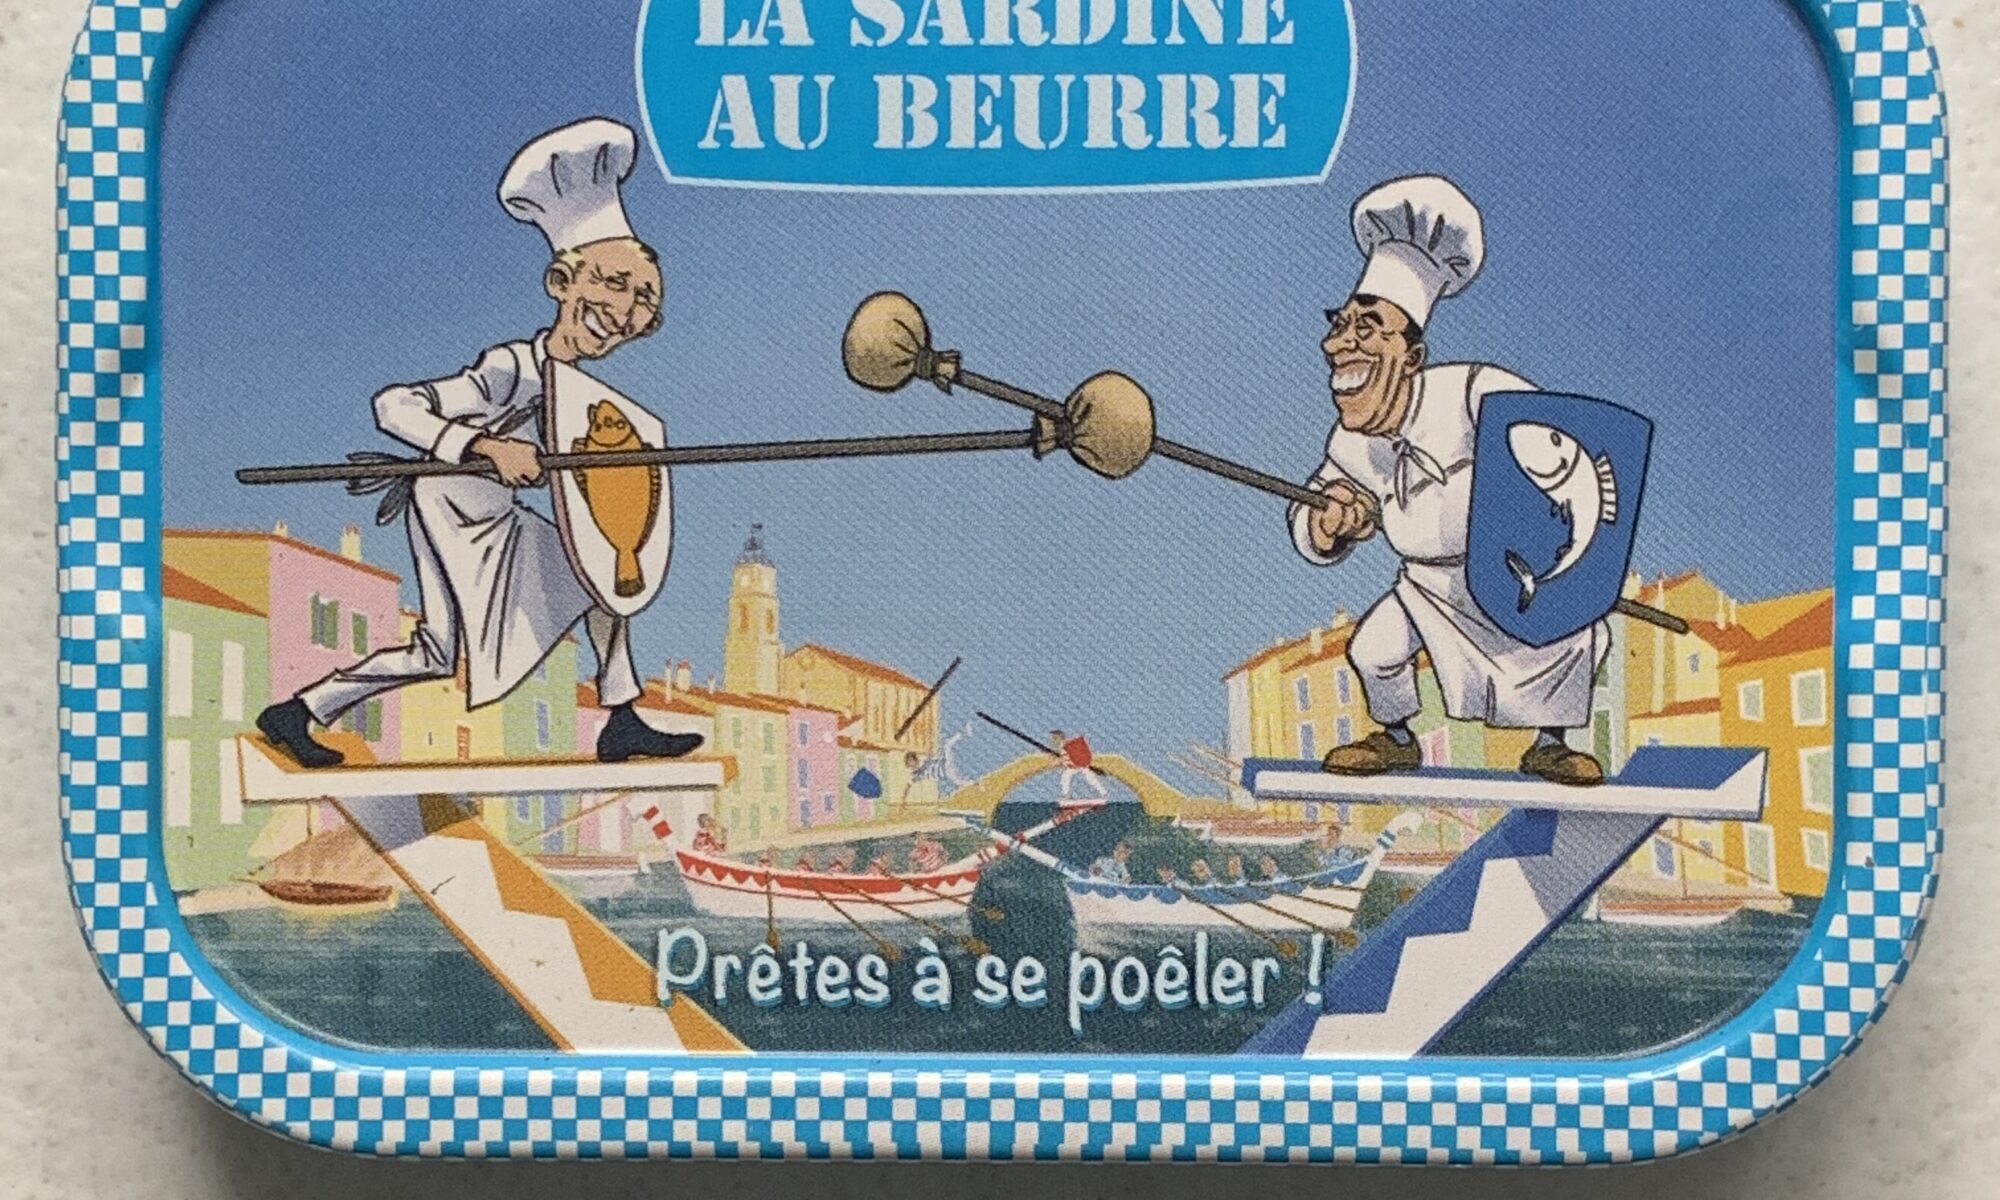 Image of the front of a tin of Ferrigno La Bonne Mer La Sardines in Butter with Fleur de Sel from Camargue